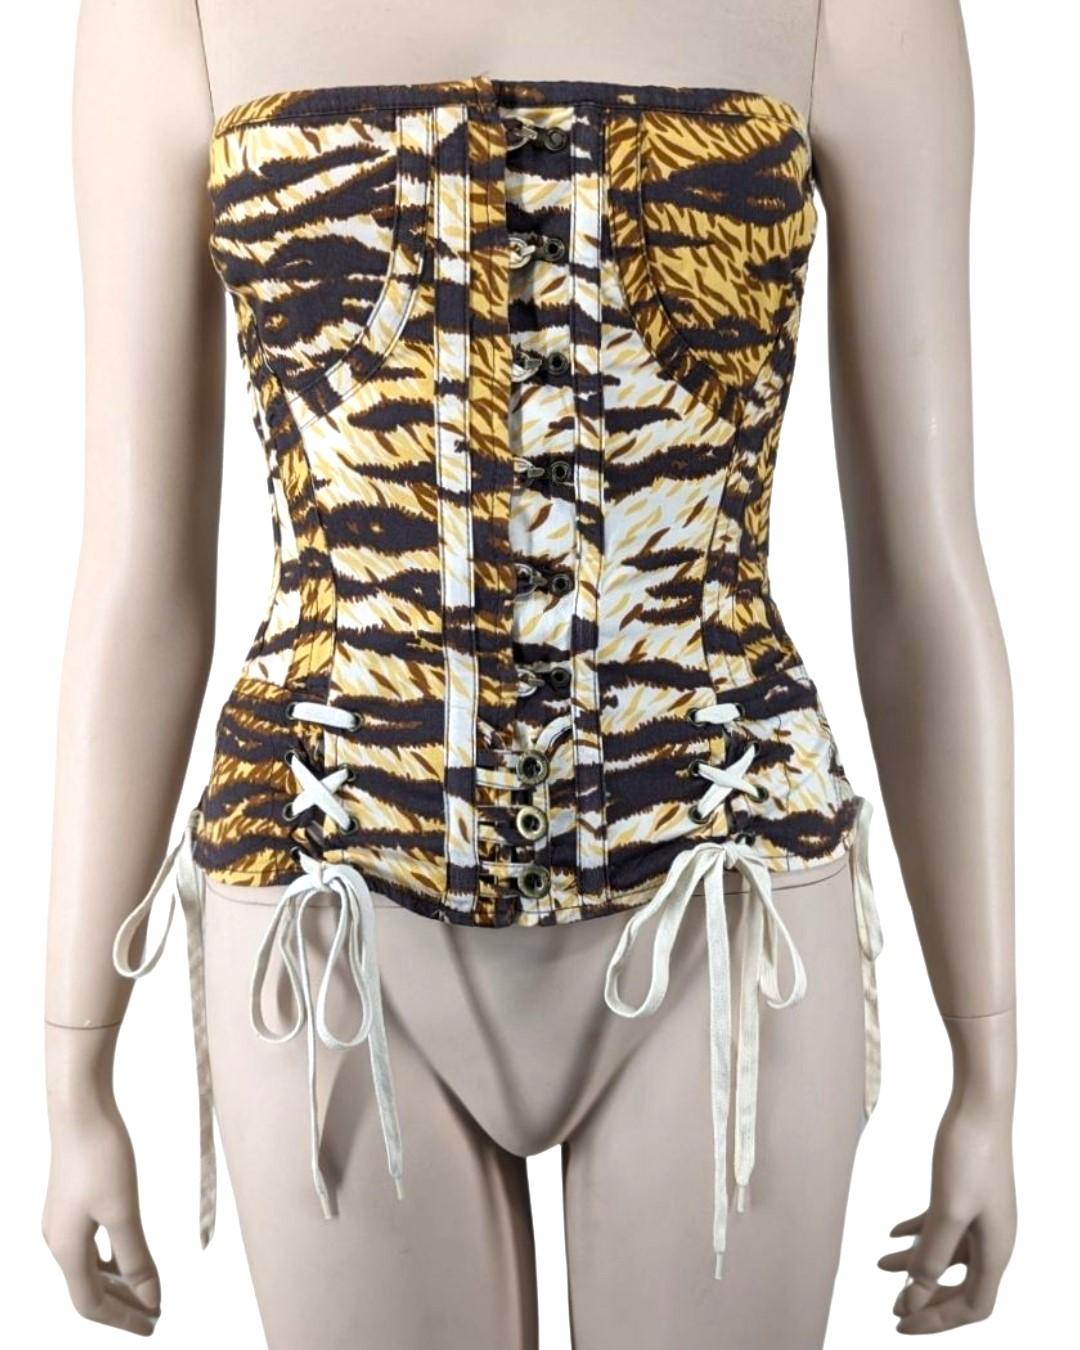 D&G by Dolce & Gabbana Animal Print Bustier For Sale 2